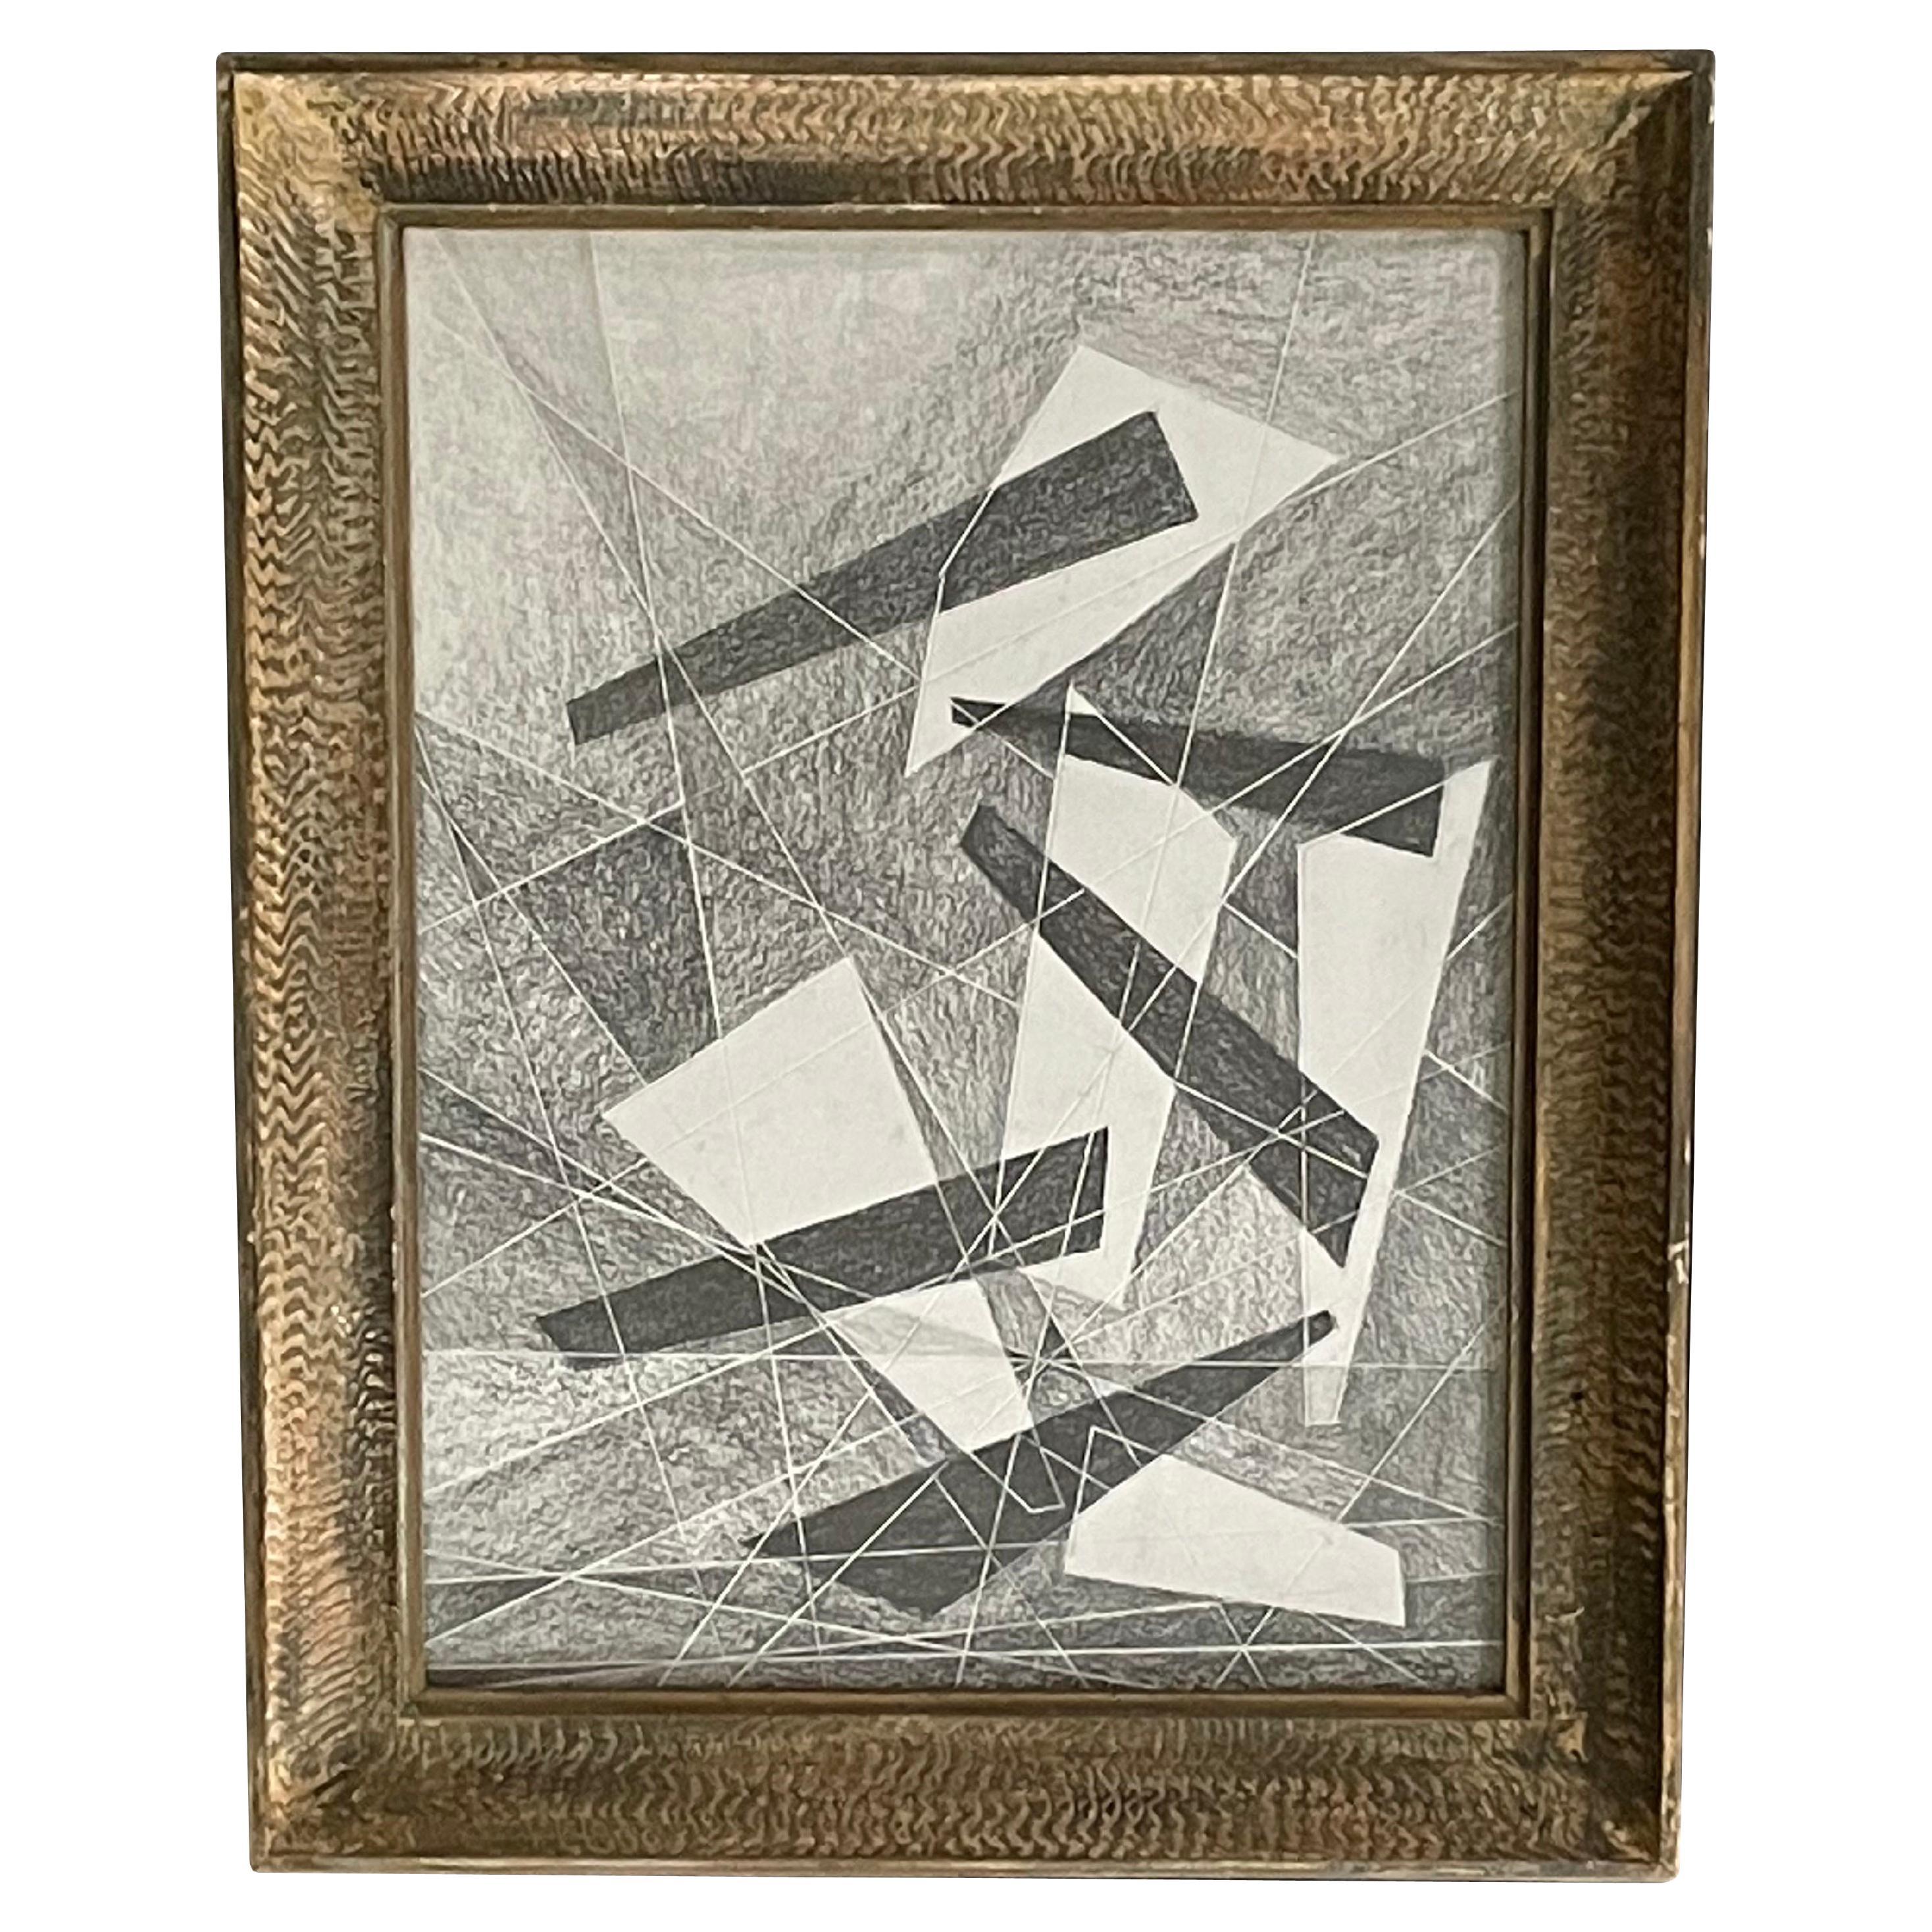 Graphite Drawing in Vintage Frame by David Dew Bruner, USA, Contemporary